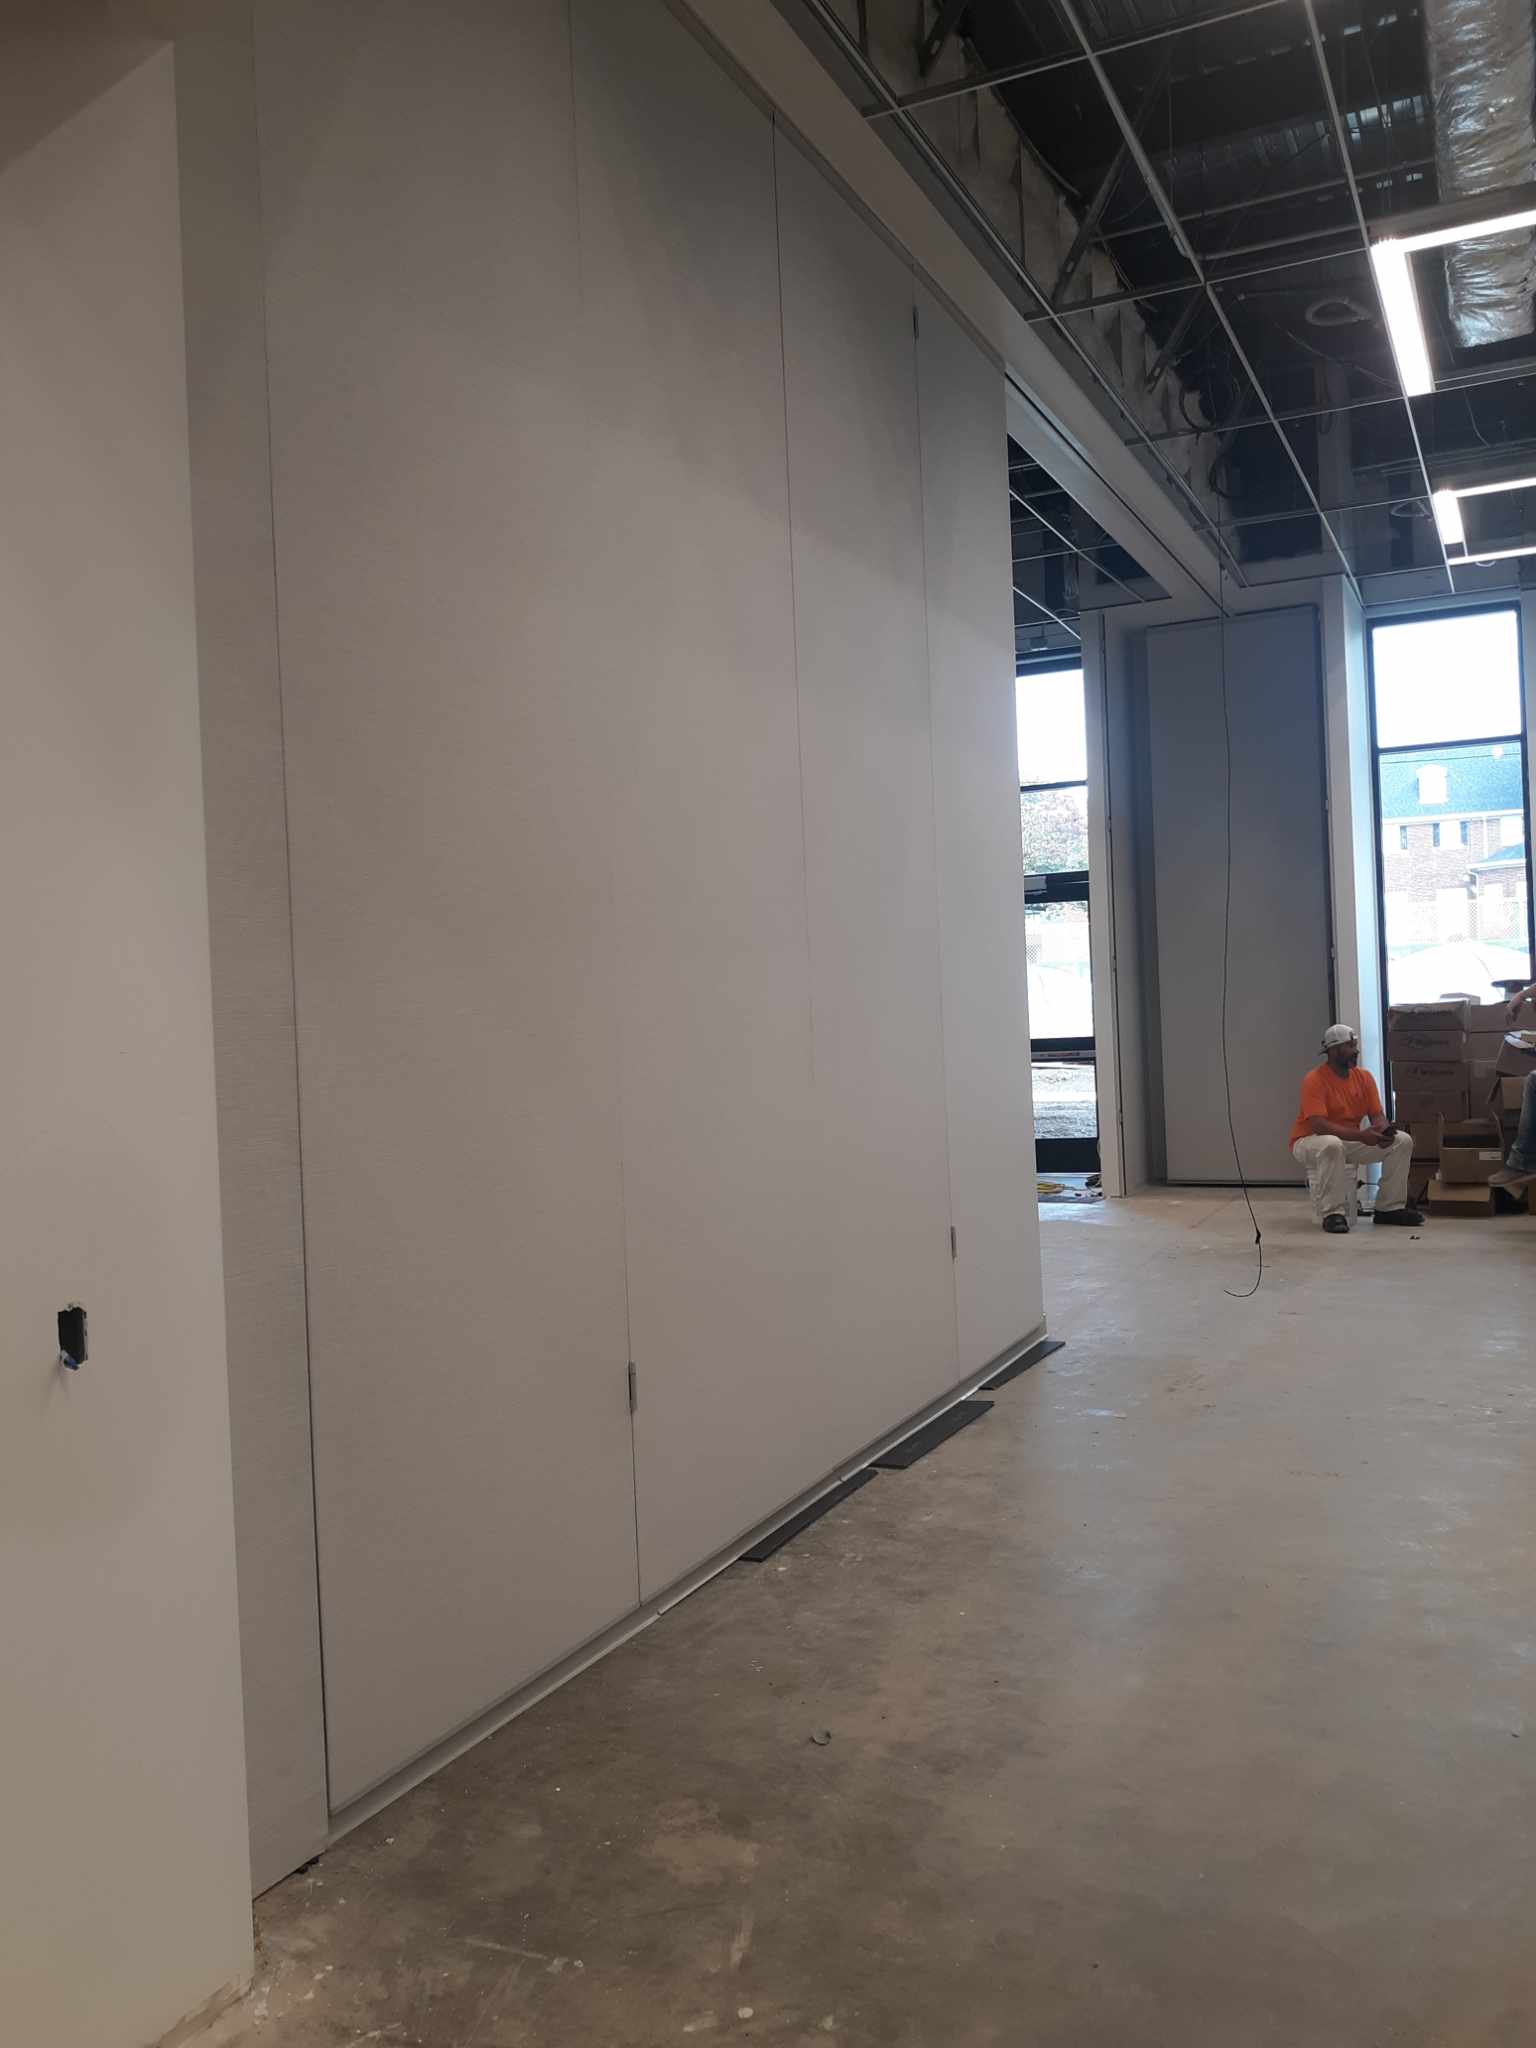 Construction crews tests the new community room wall dividers. The image shows the wall between Community room 1 and 2 partially slid out.